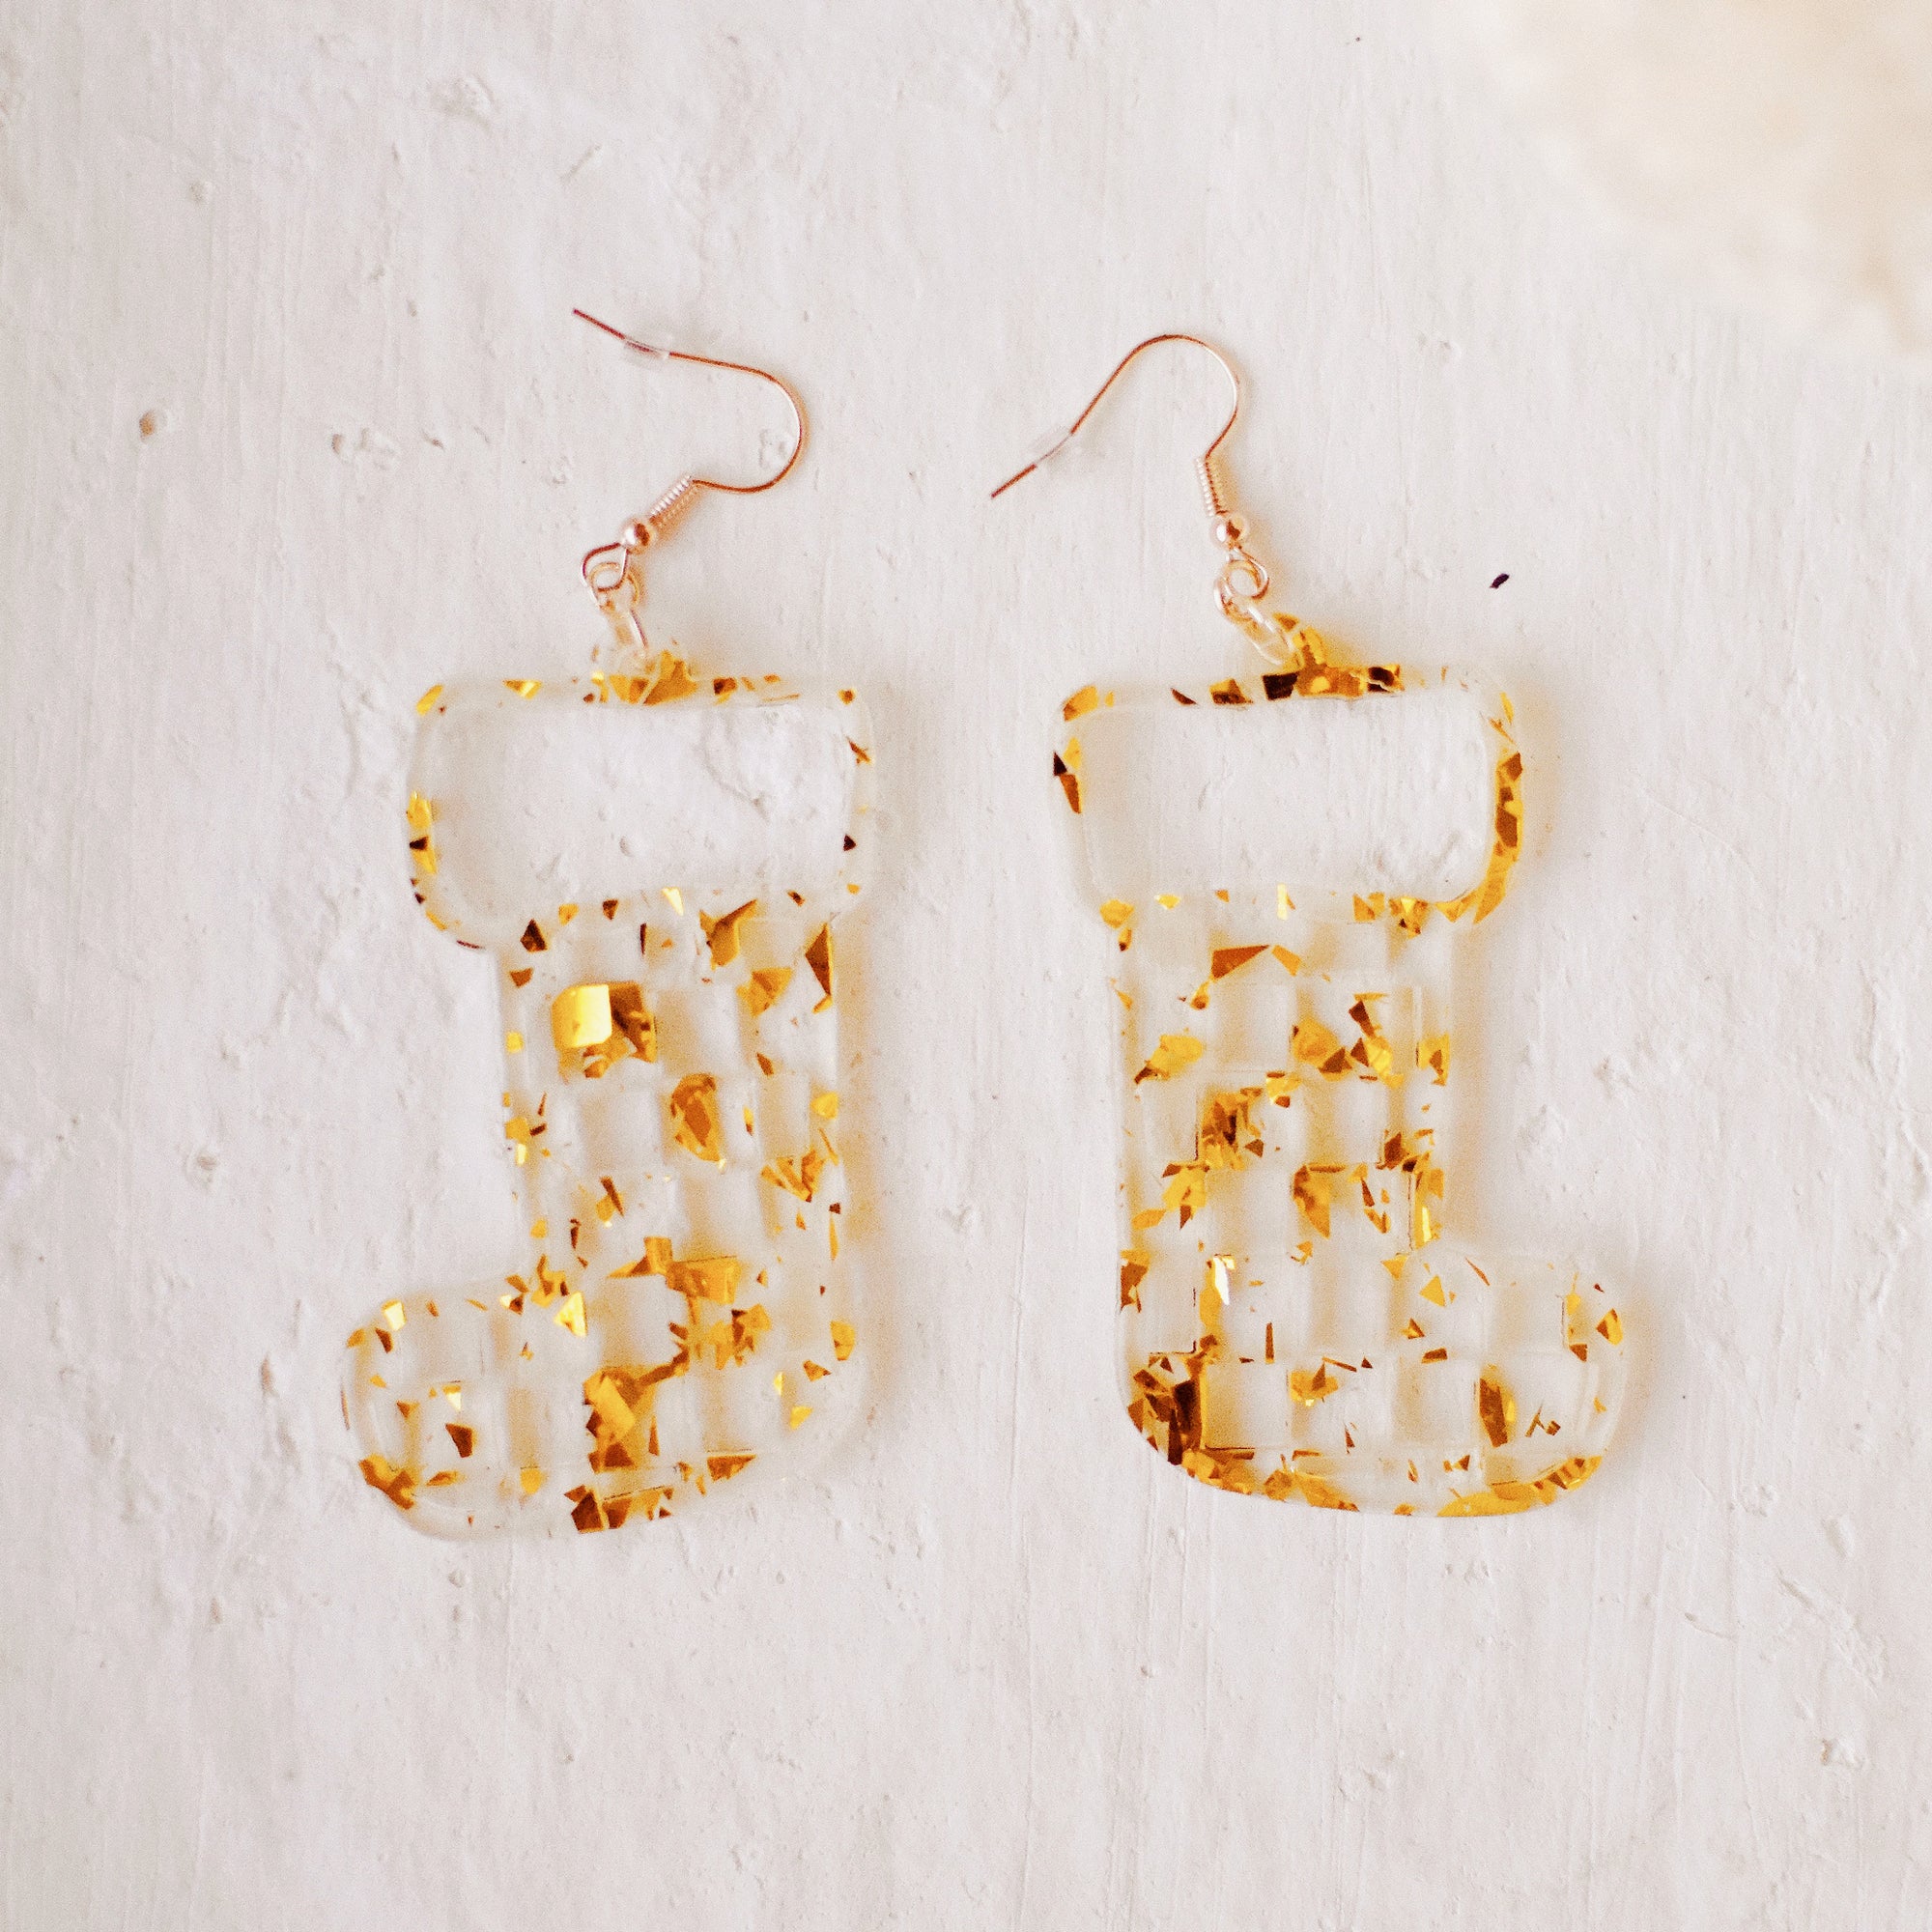 Earrings - Christmas - Confetti Gold Checkered Stocking Dangles